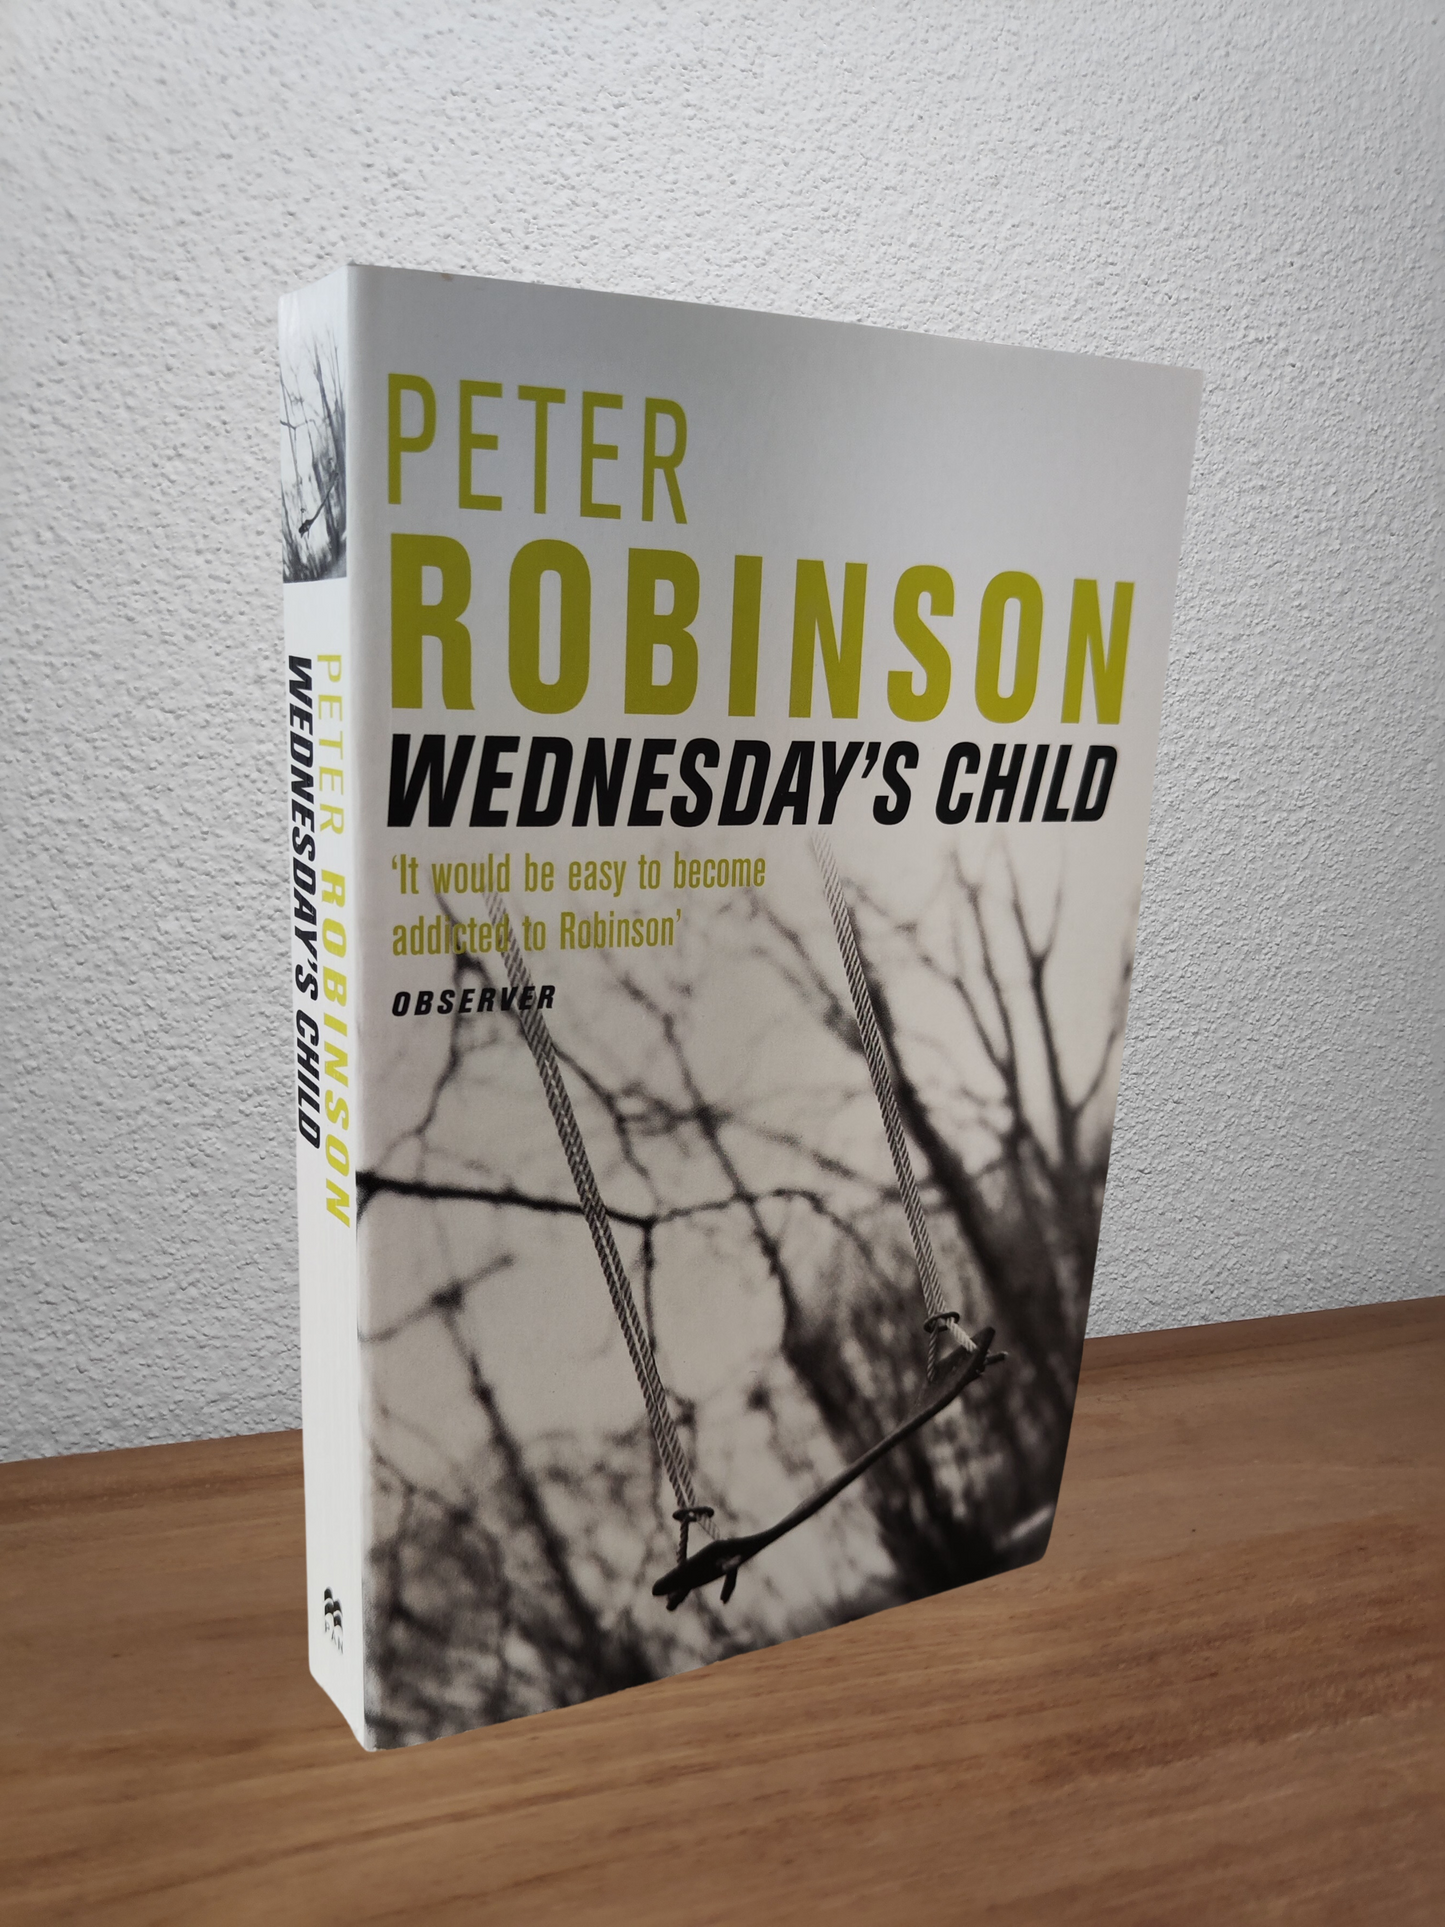 Peter Robinson - Wednesday's Child (Inspector Banks #6)